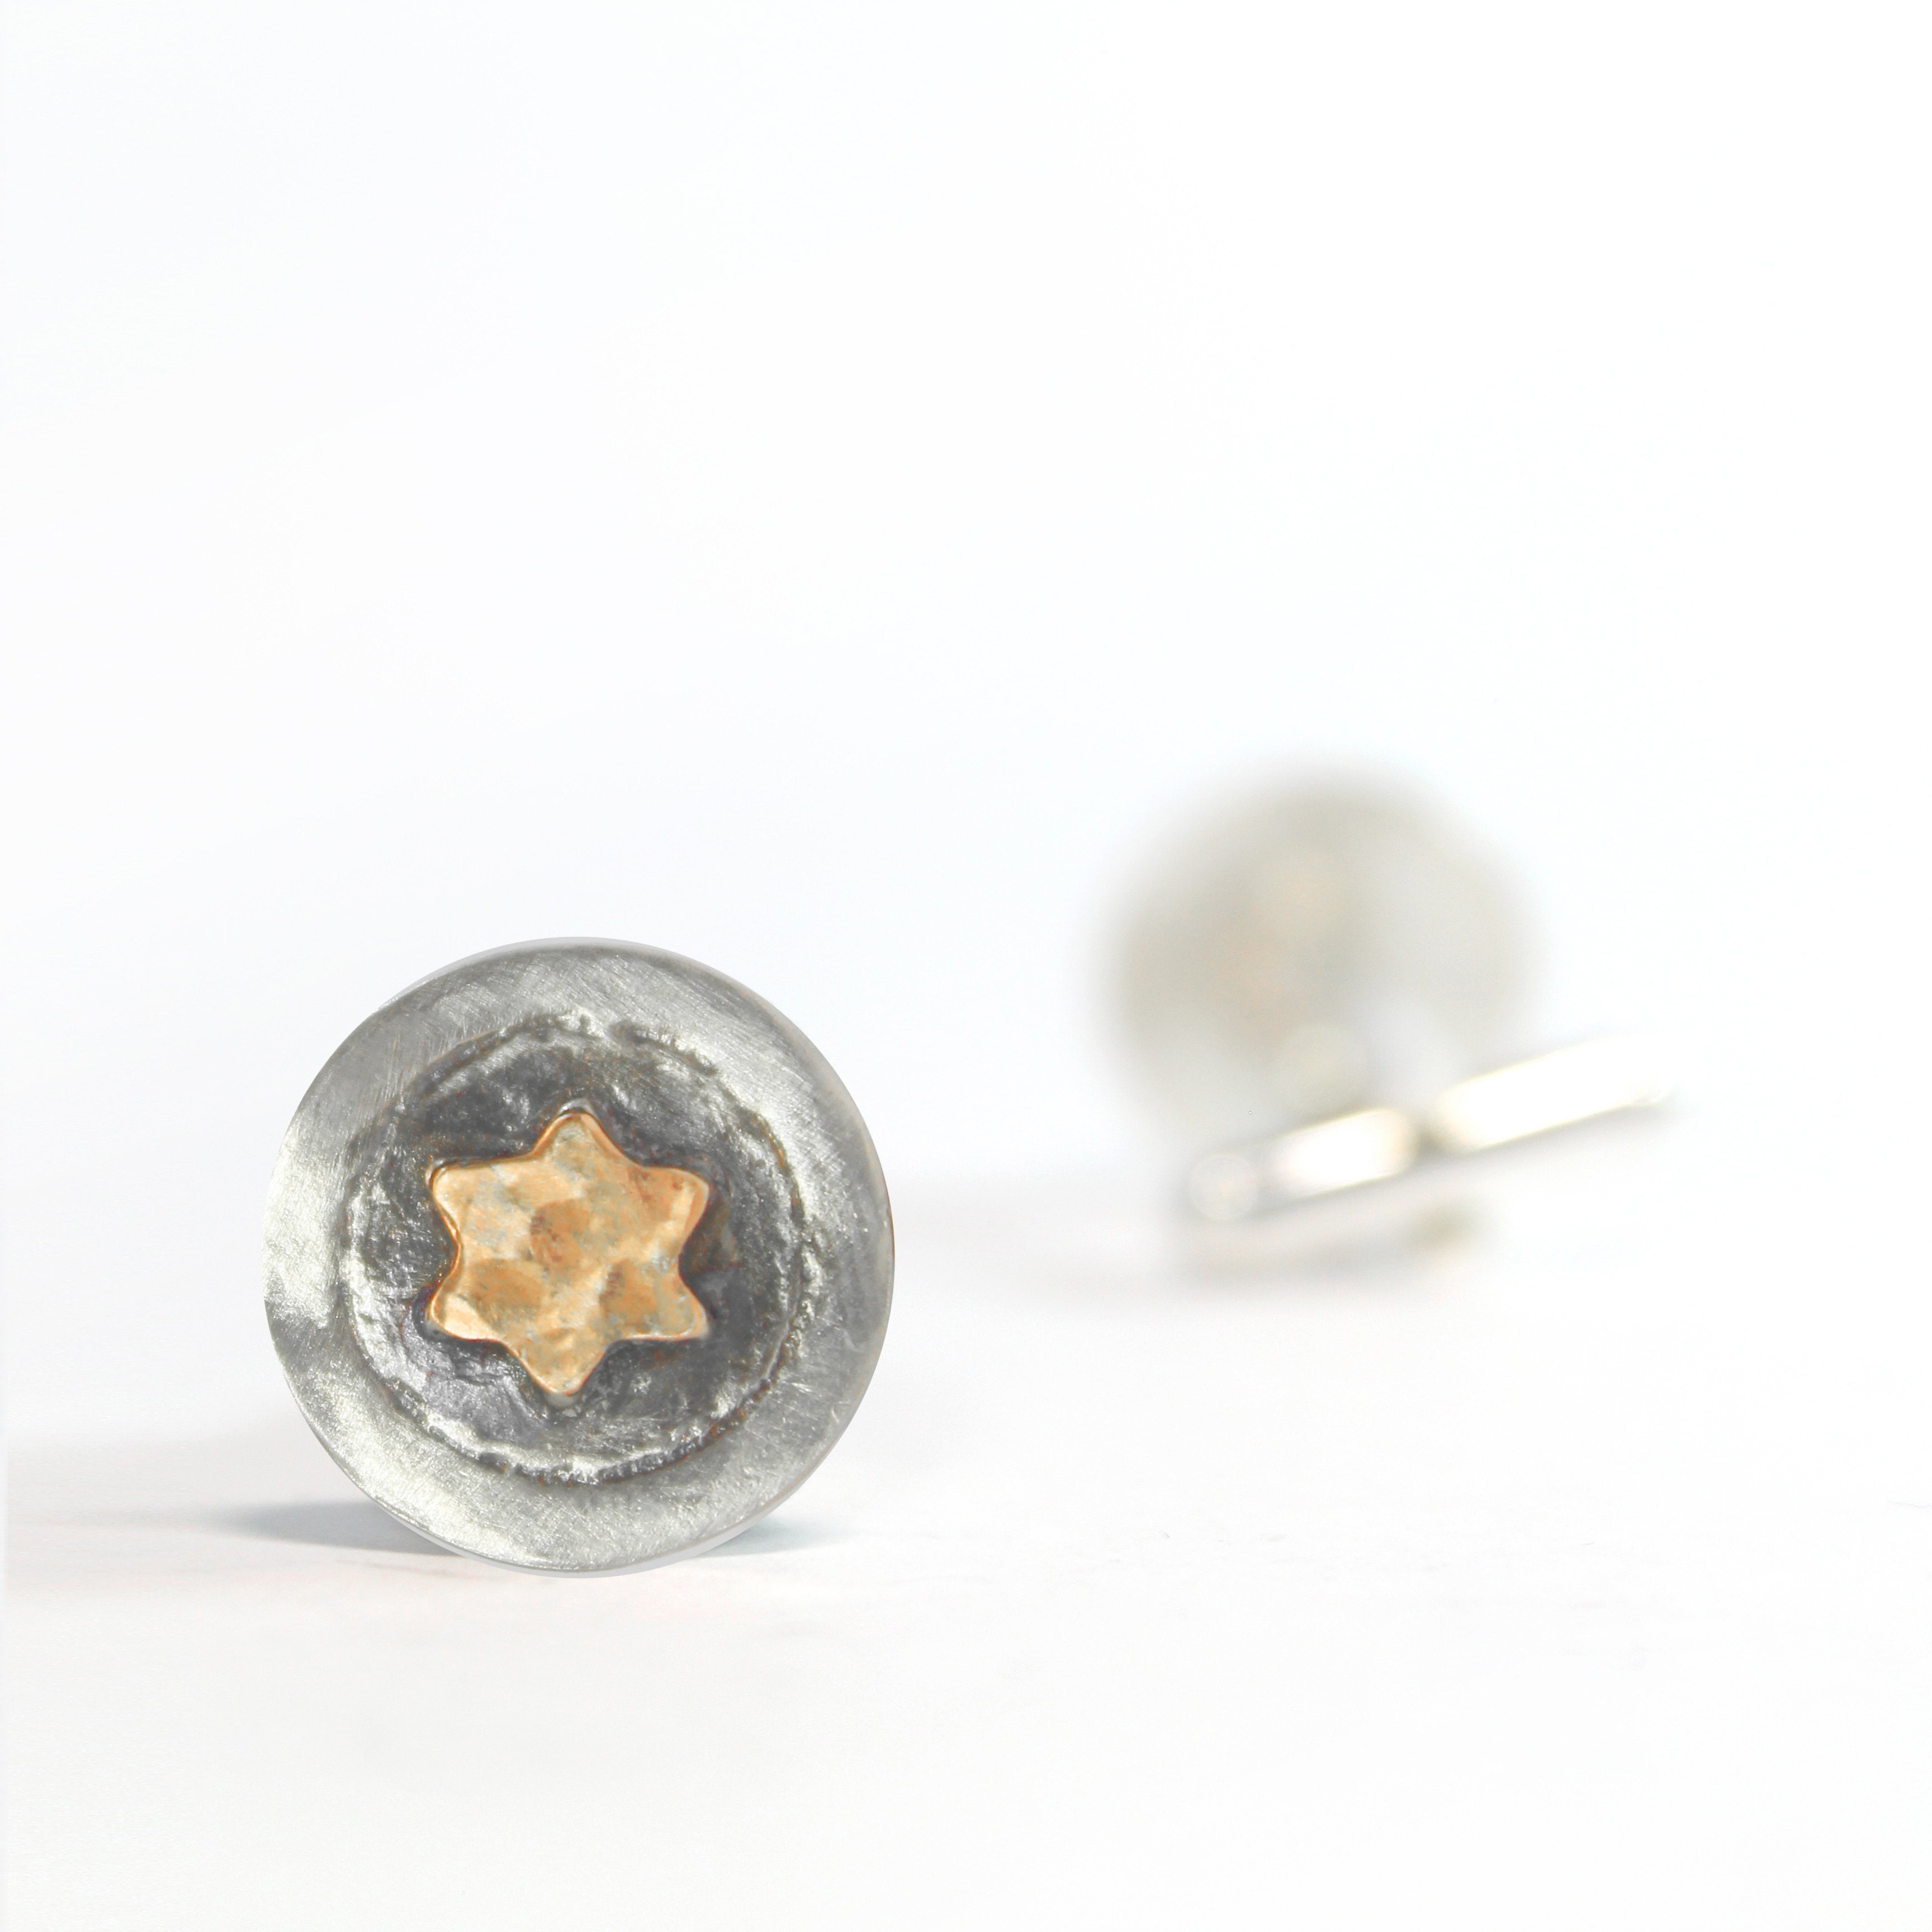 Silver & Red Gold Star of David Cufflinks - Shulamit Kanter Official Store